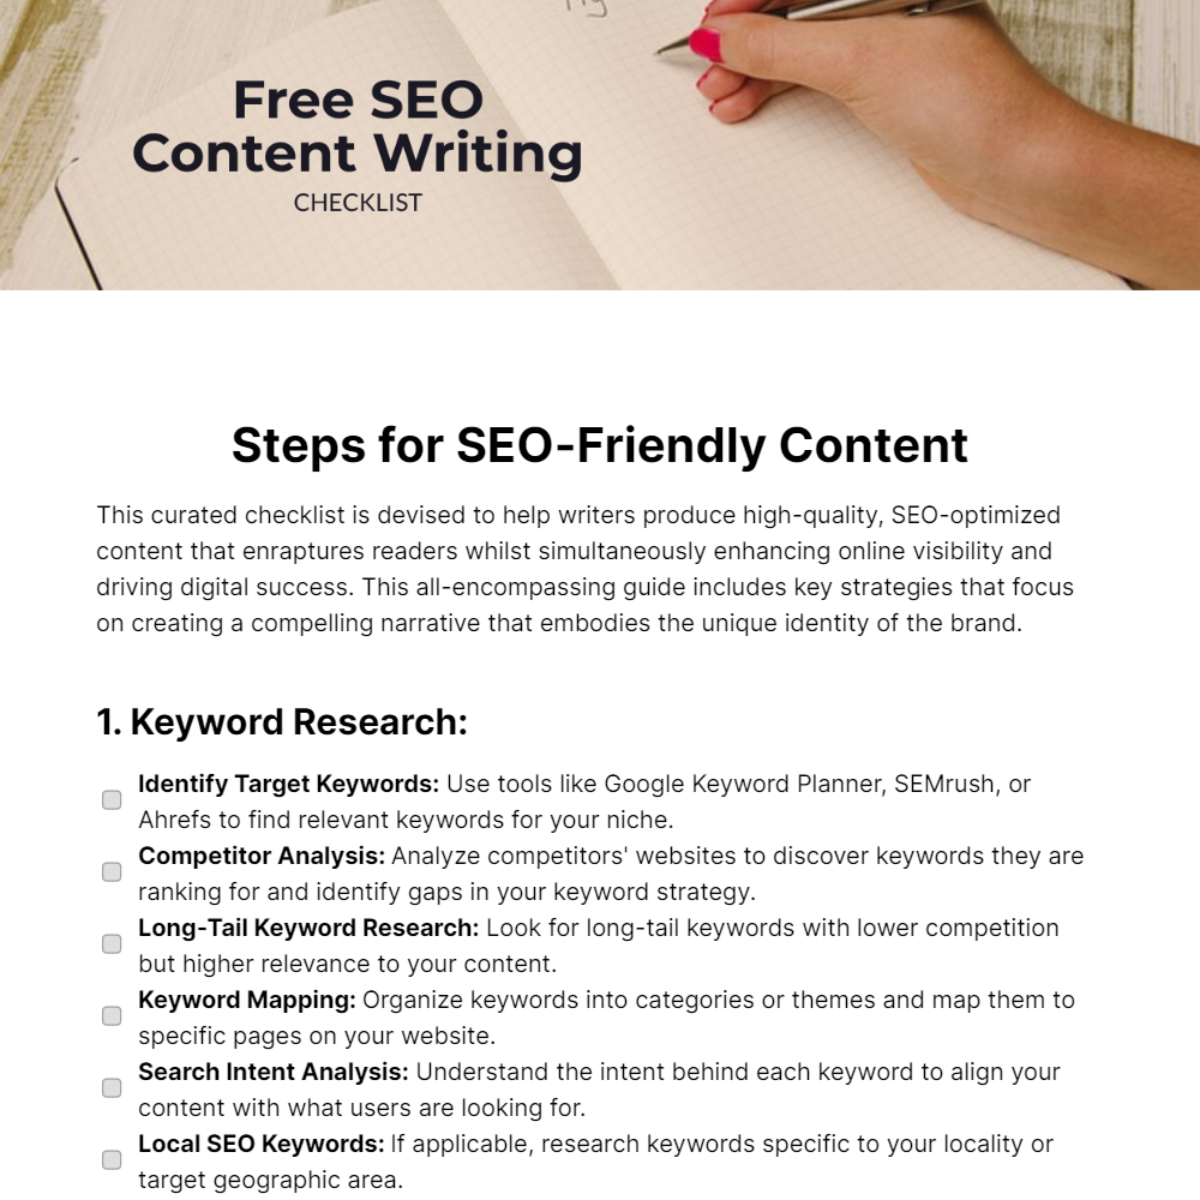 Free SEO Content Writing Checklist Template